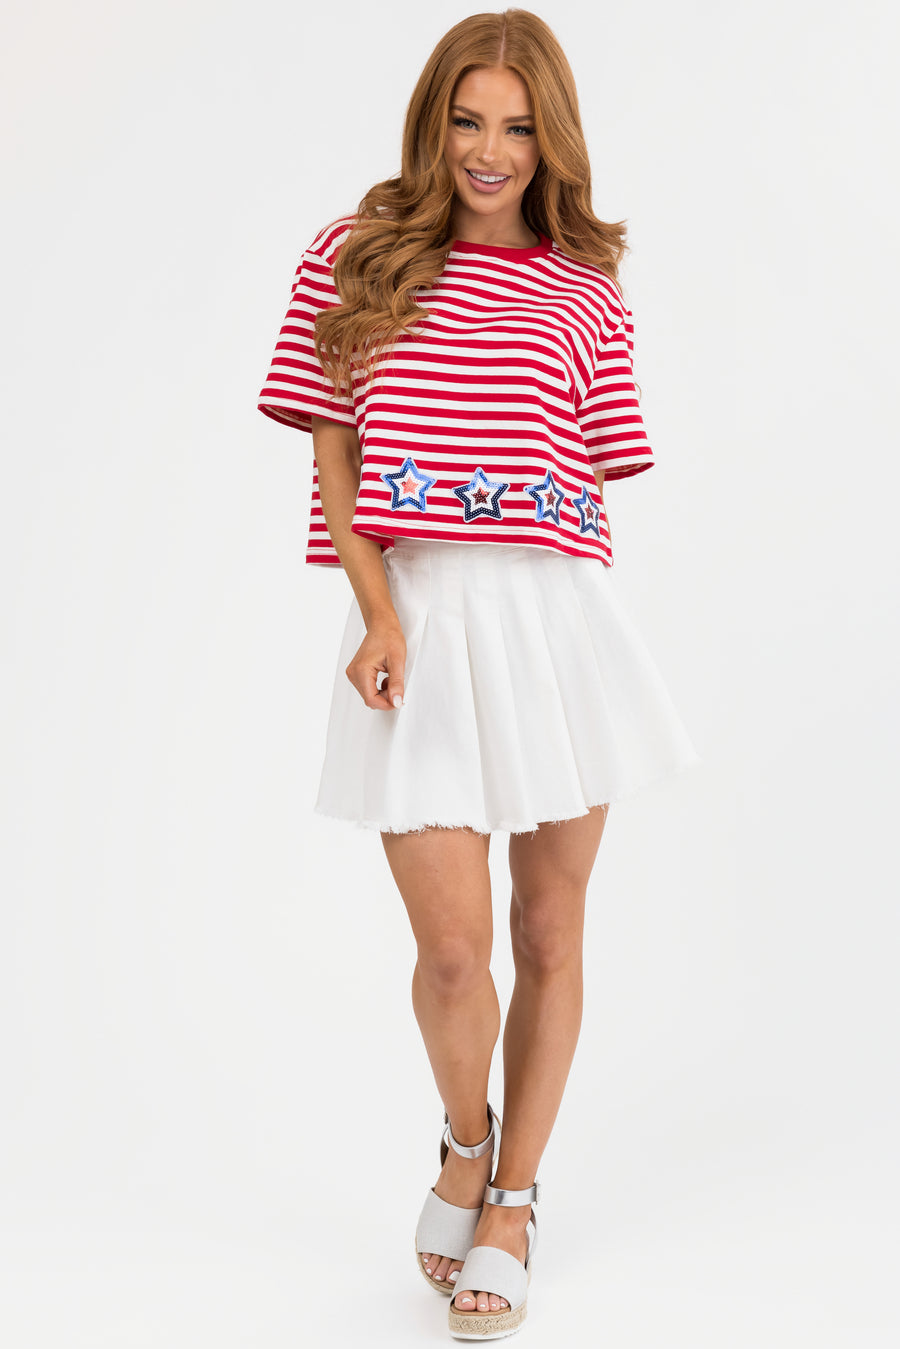 Lipstick and Ivory Stars and Stripes Print Top